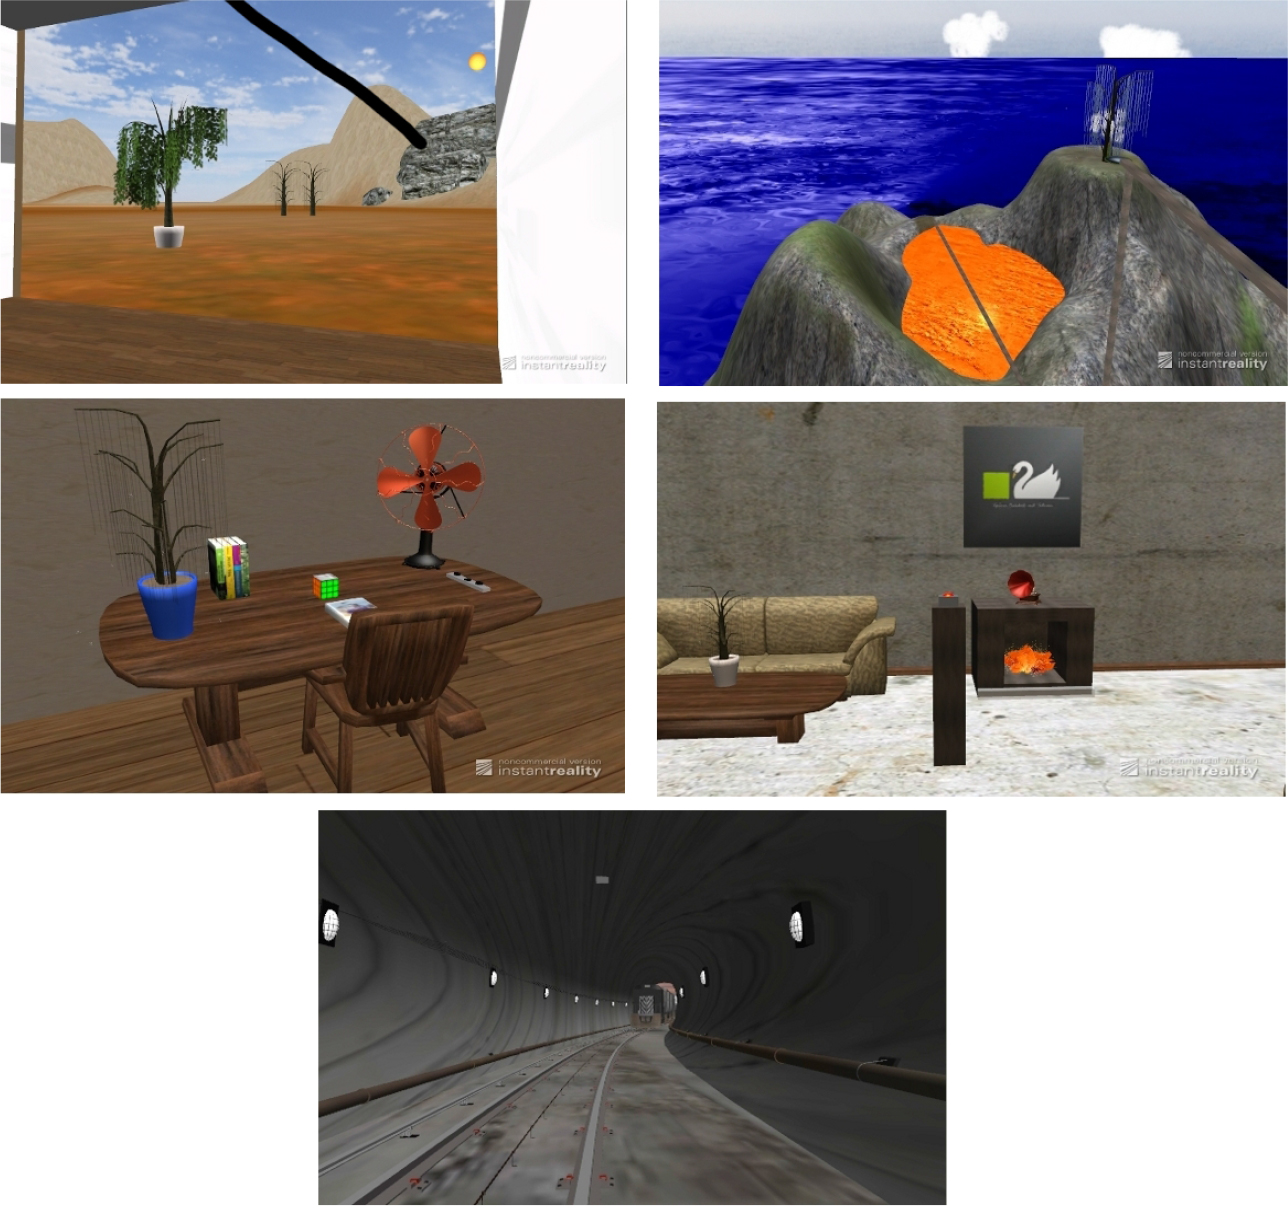 Scenes presented for the subjective measures. From left to right and top to bottom: Desert, Volcano, Fan, Chimney and Train.